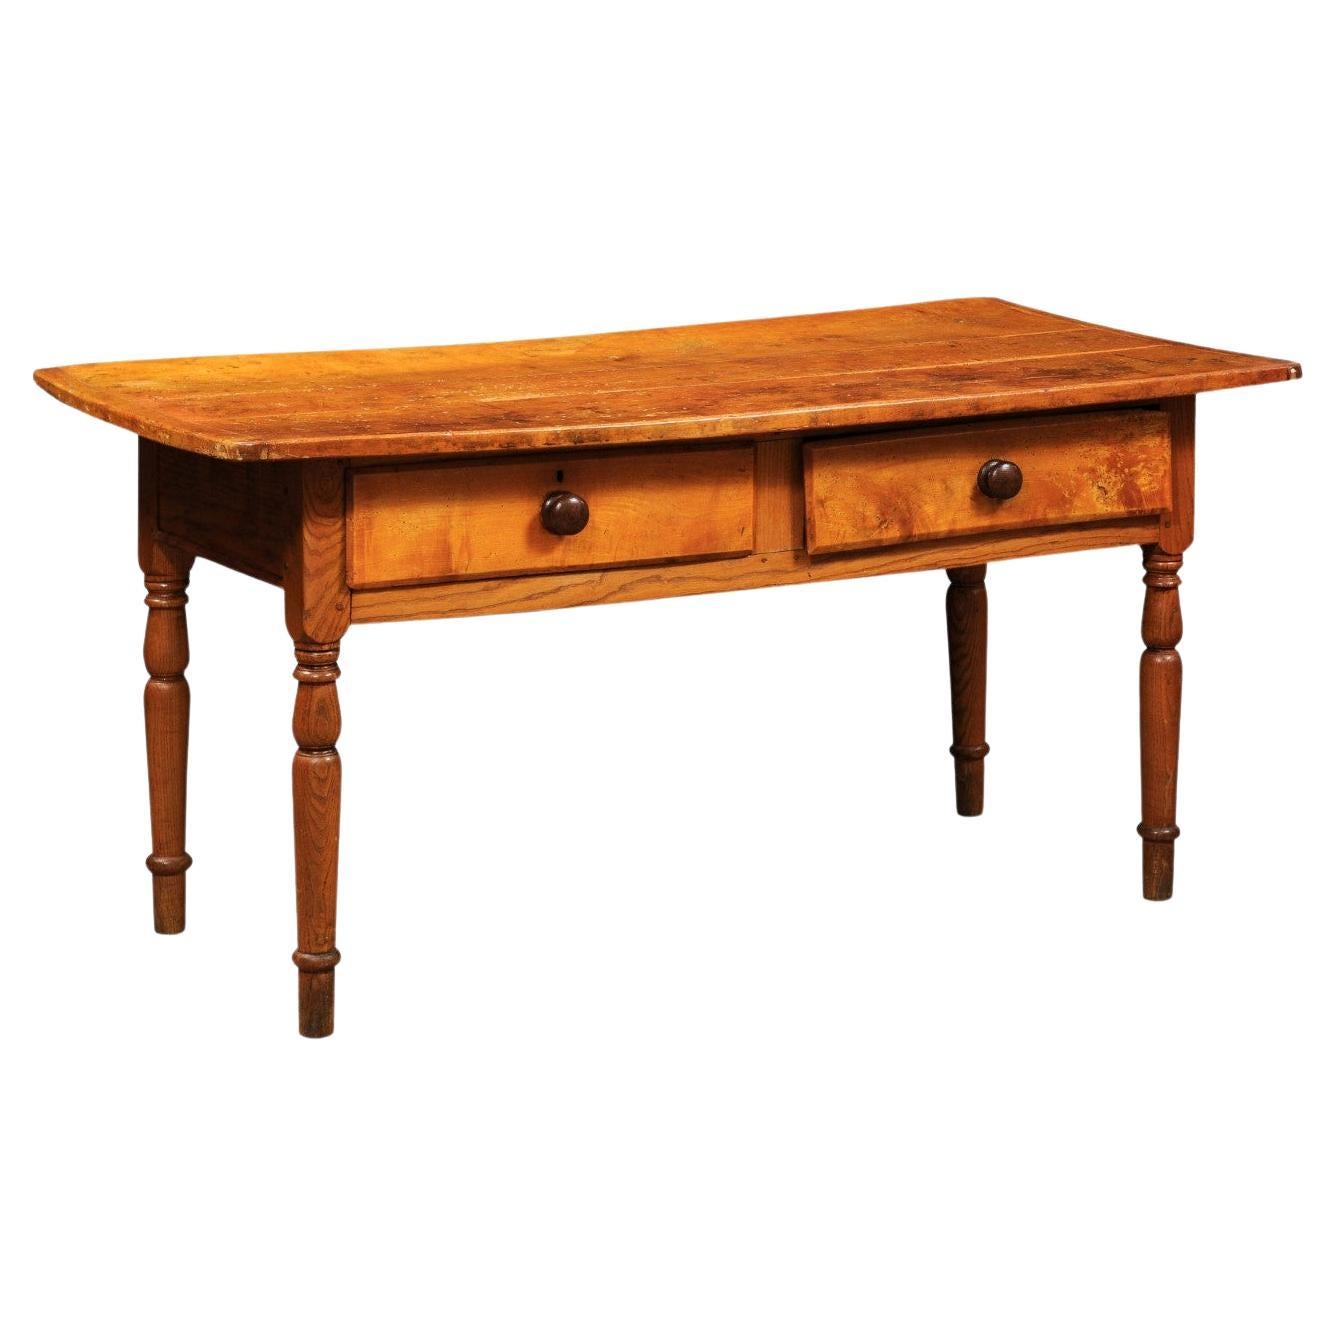 Large American Pine Kitchen Table with 2 Deep Drawers and Turned Legs, c1890 For Sale